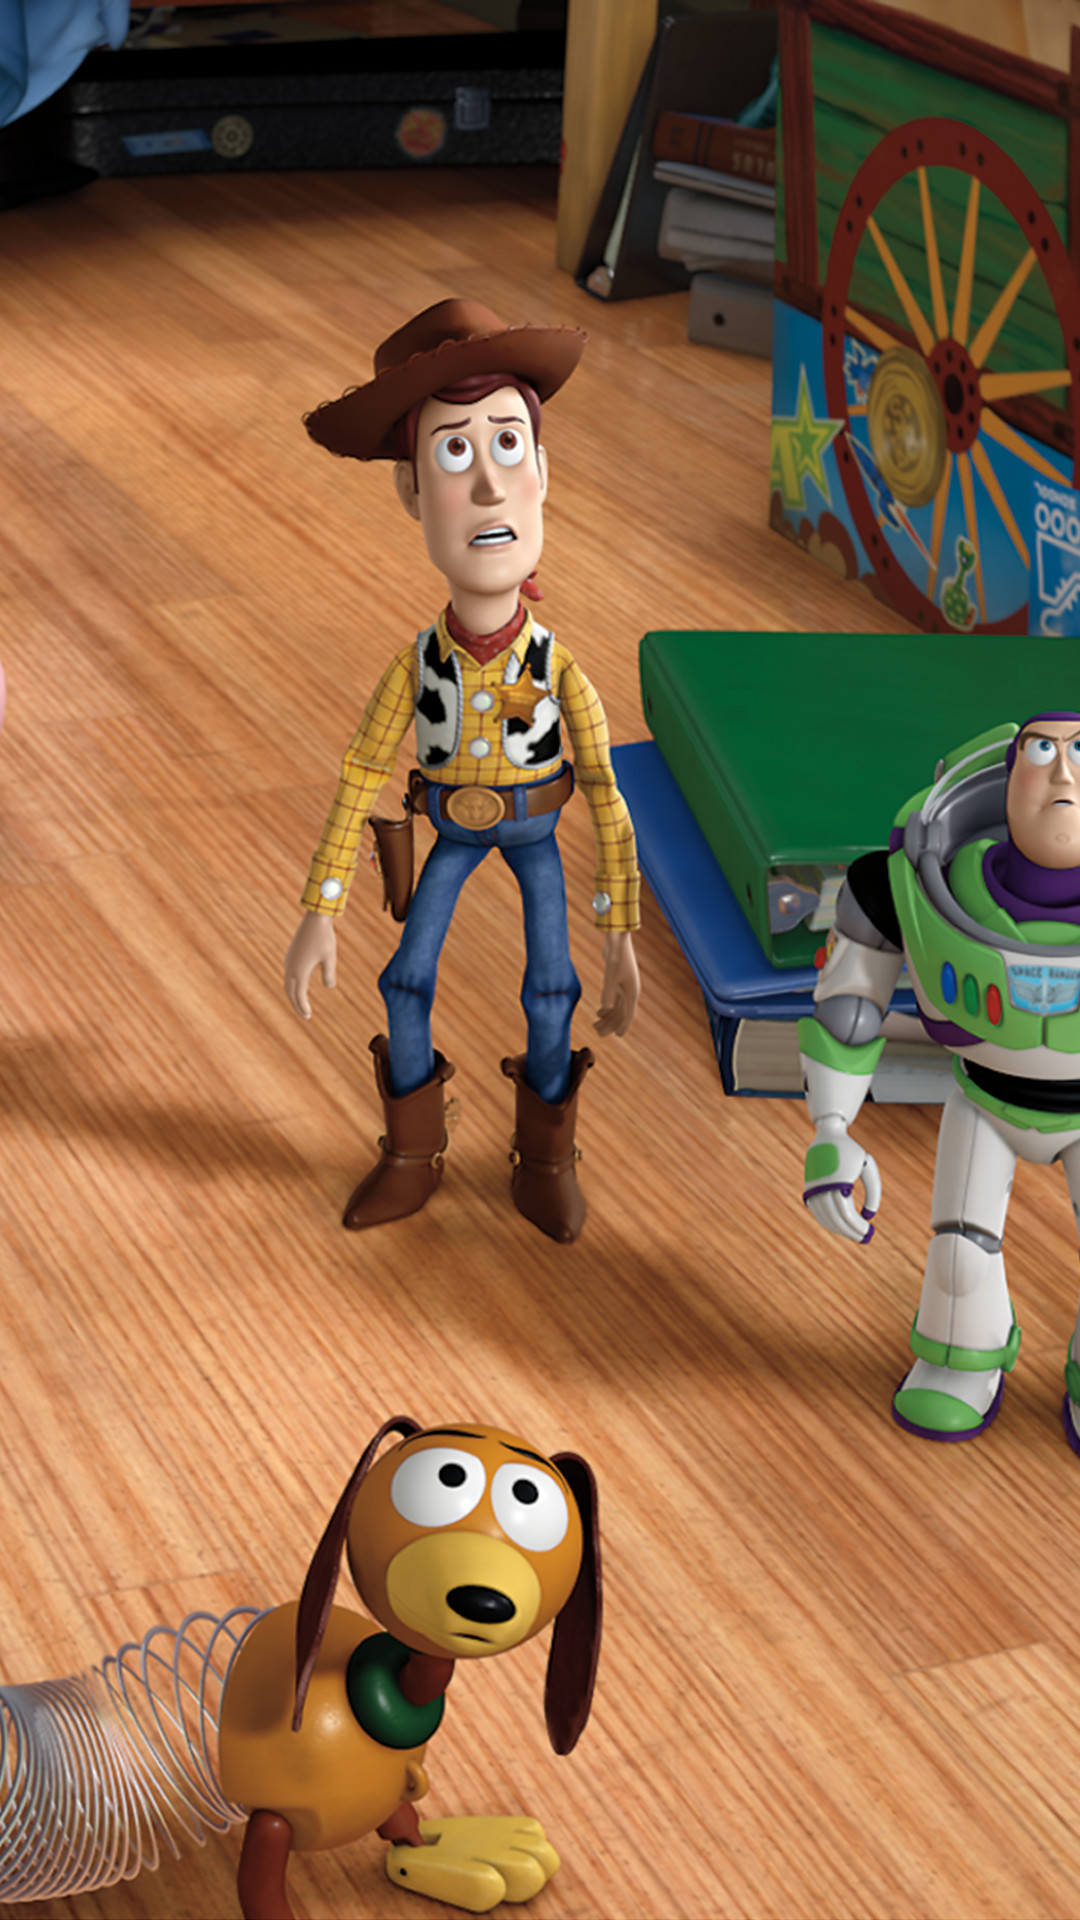 Tải xuống APK Toy story Sid: Wallpaper 4K cho Android